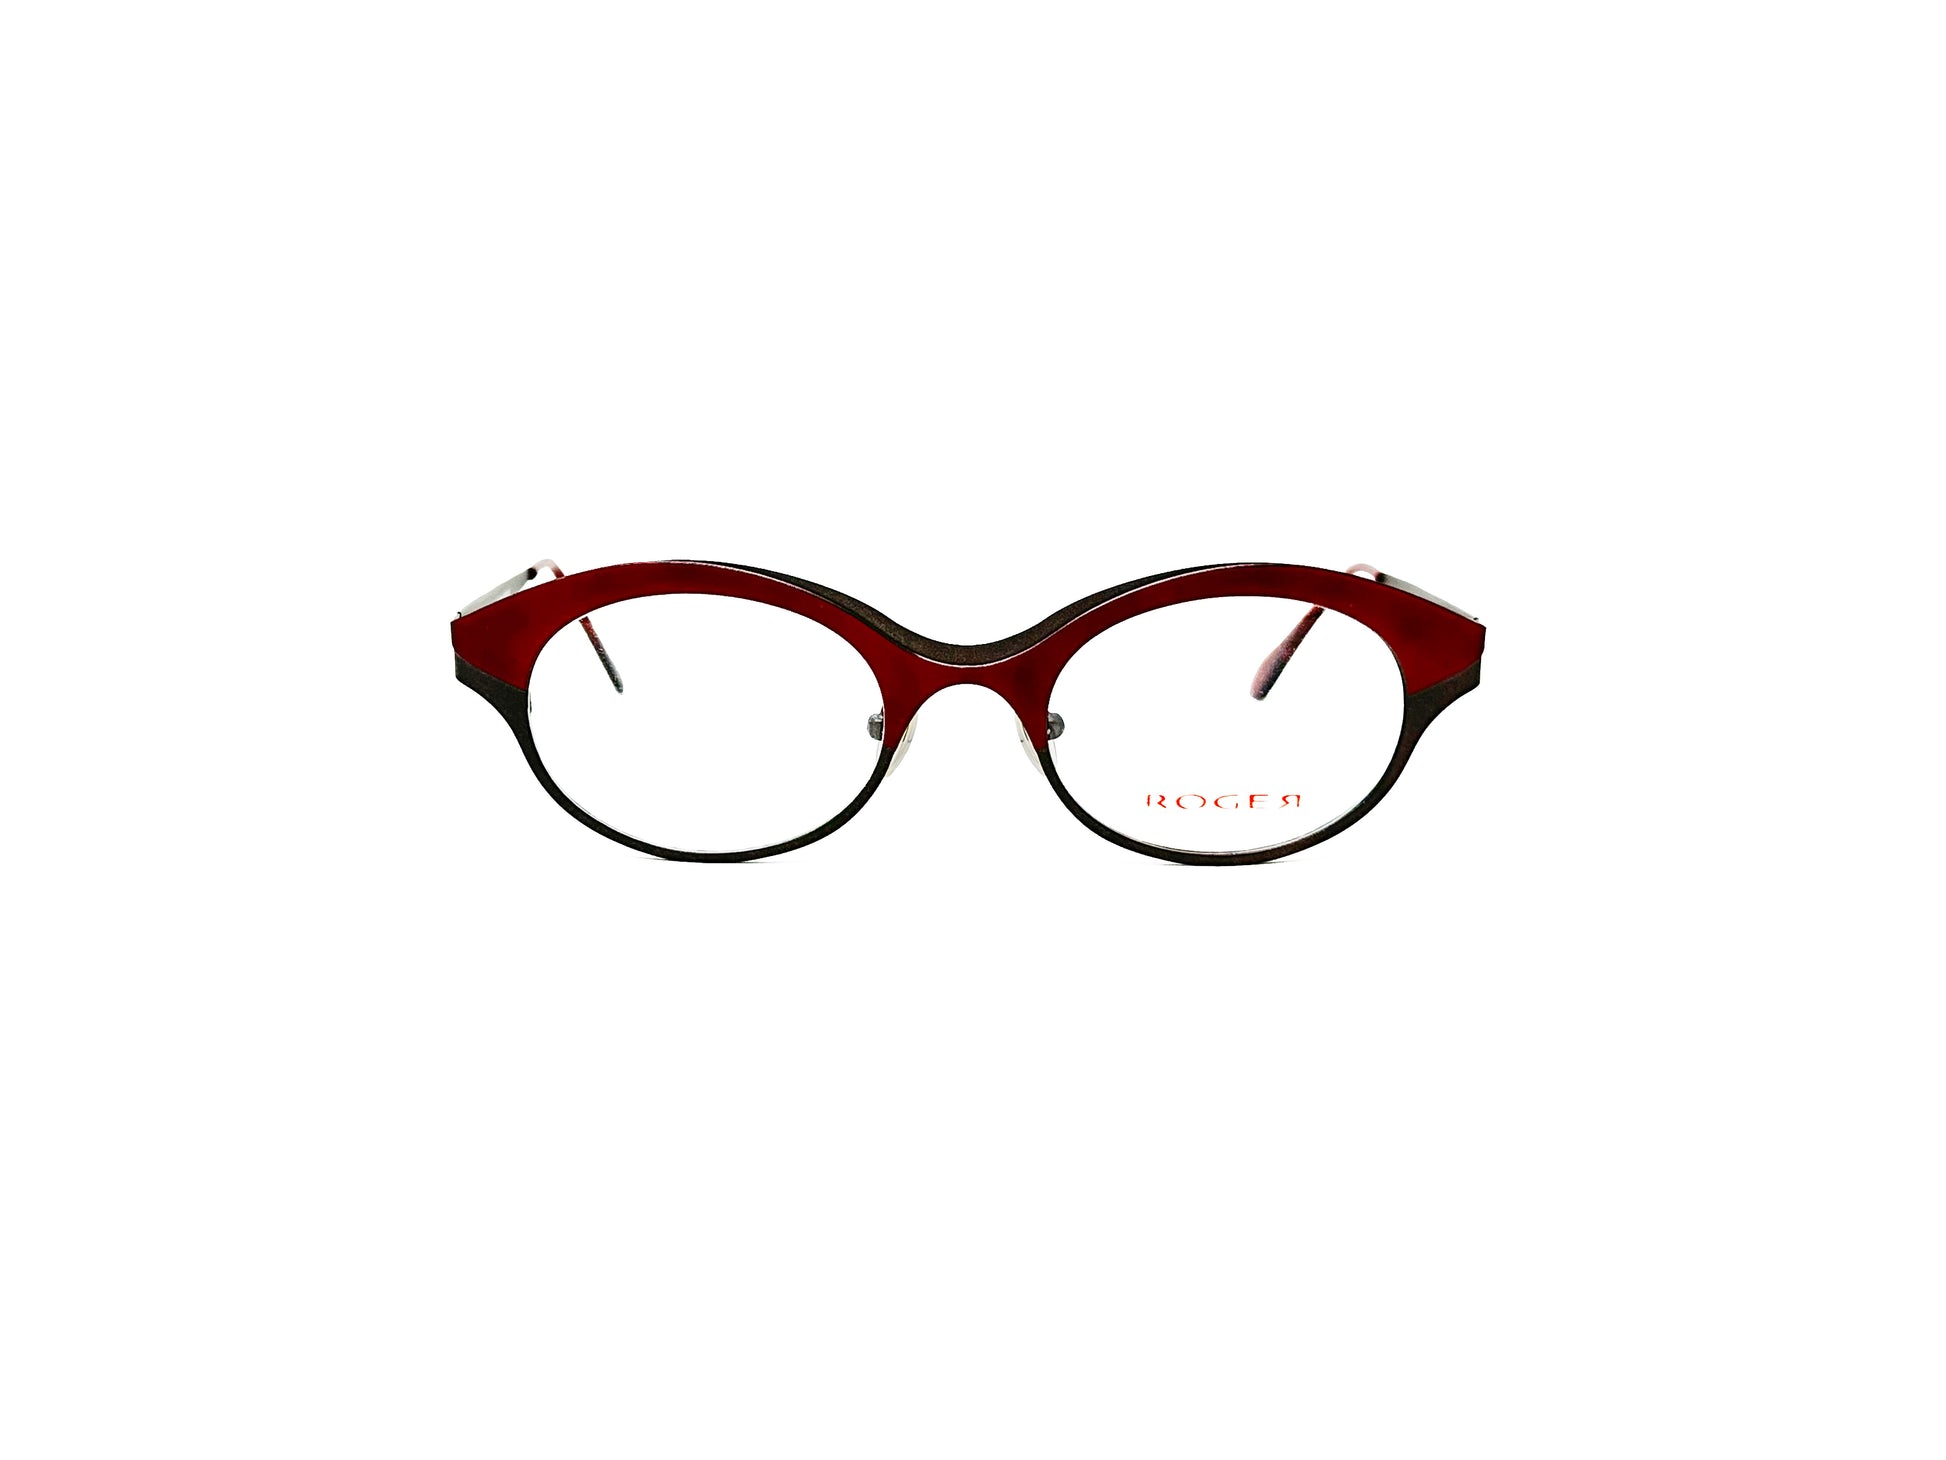 Roger metal, oval optical frame, with frame thicker on top than bottom. Model: Morris. Color: 2 - Burgundy & Black. Front view. 